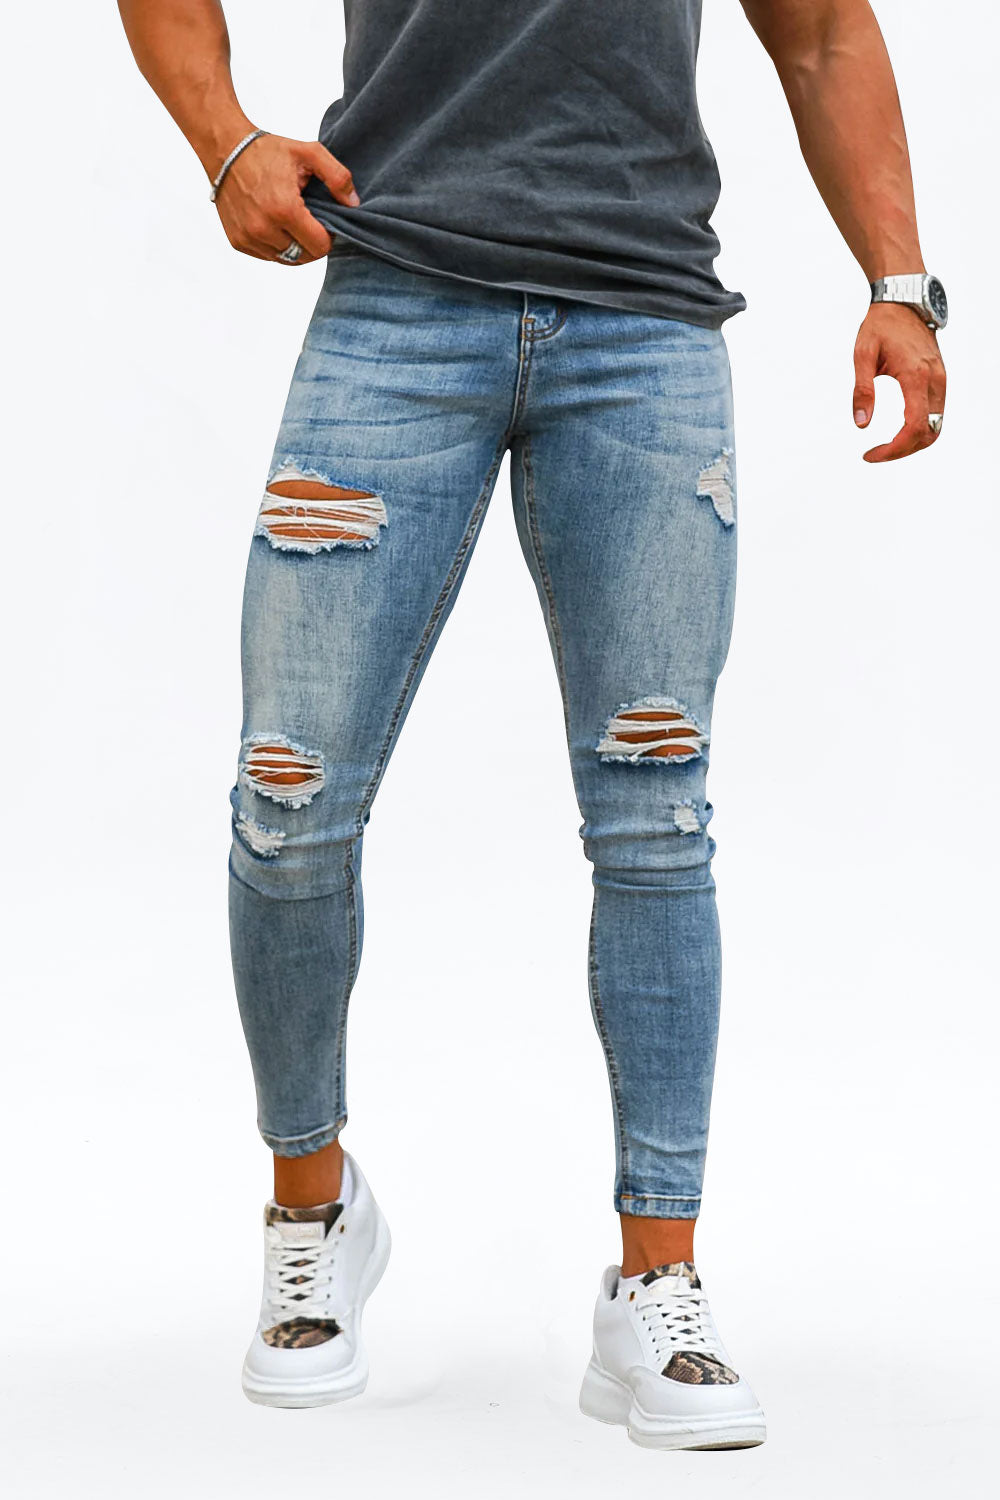 GINGTTO Men's Ripped Skinny Jeans